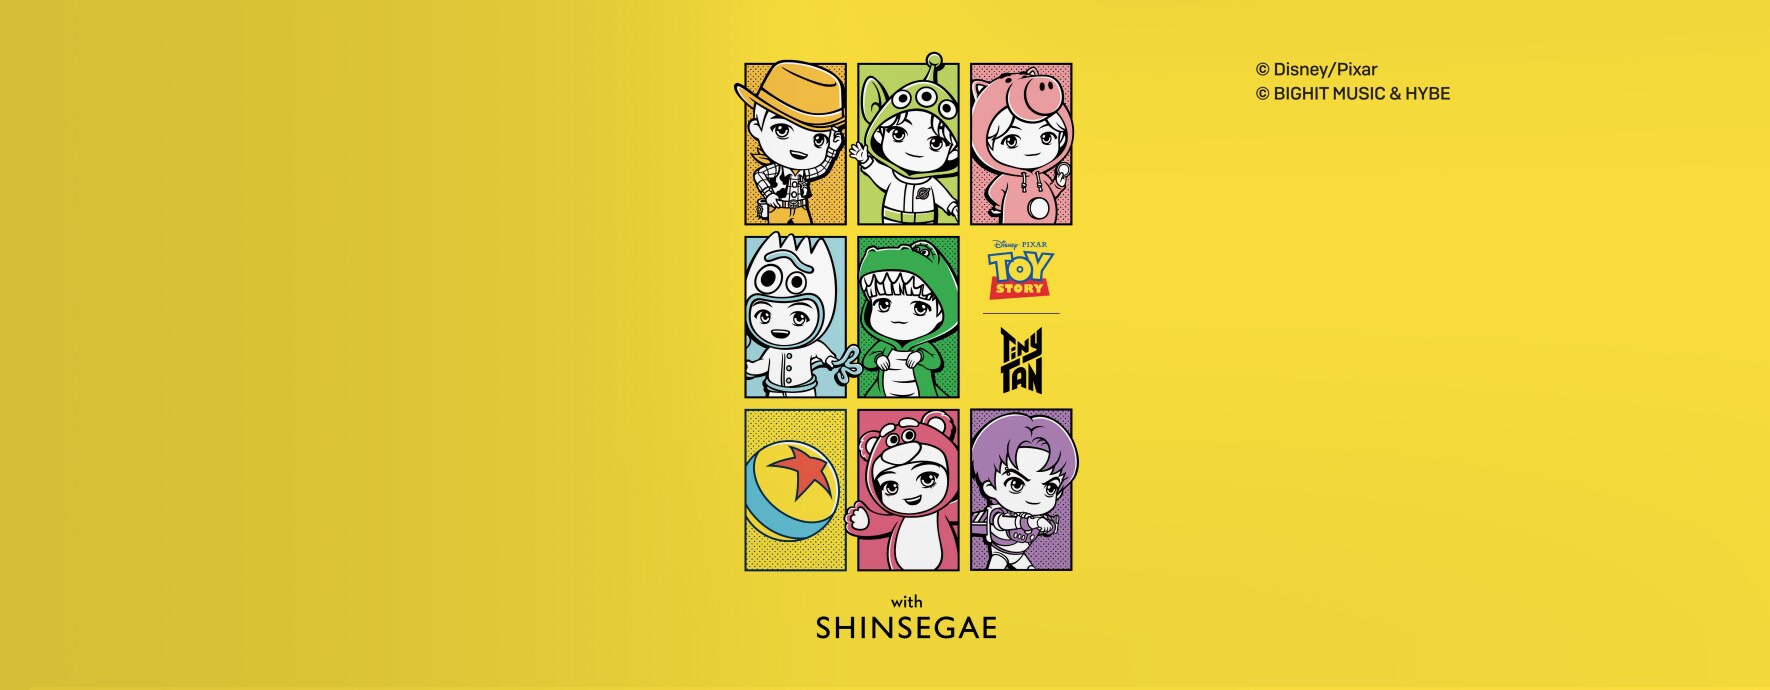 TinyTAN as Toy Story with SHINSEGAE